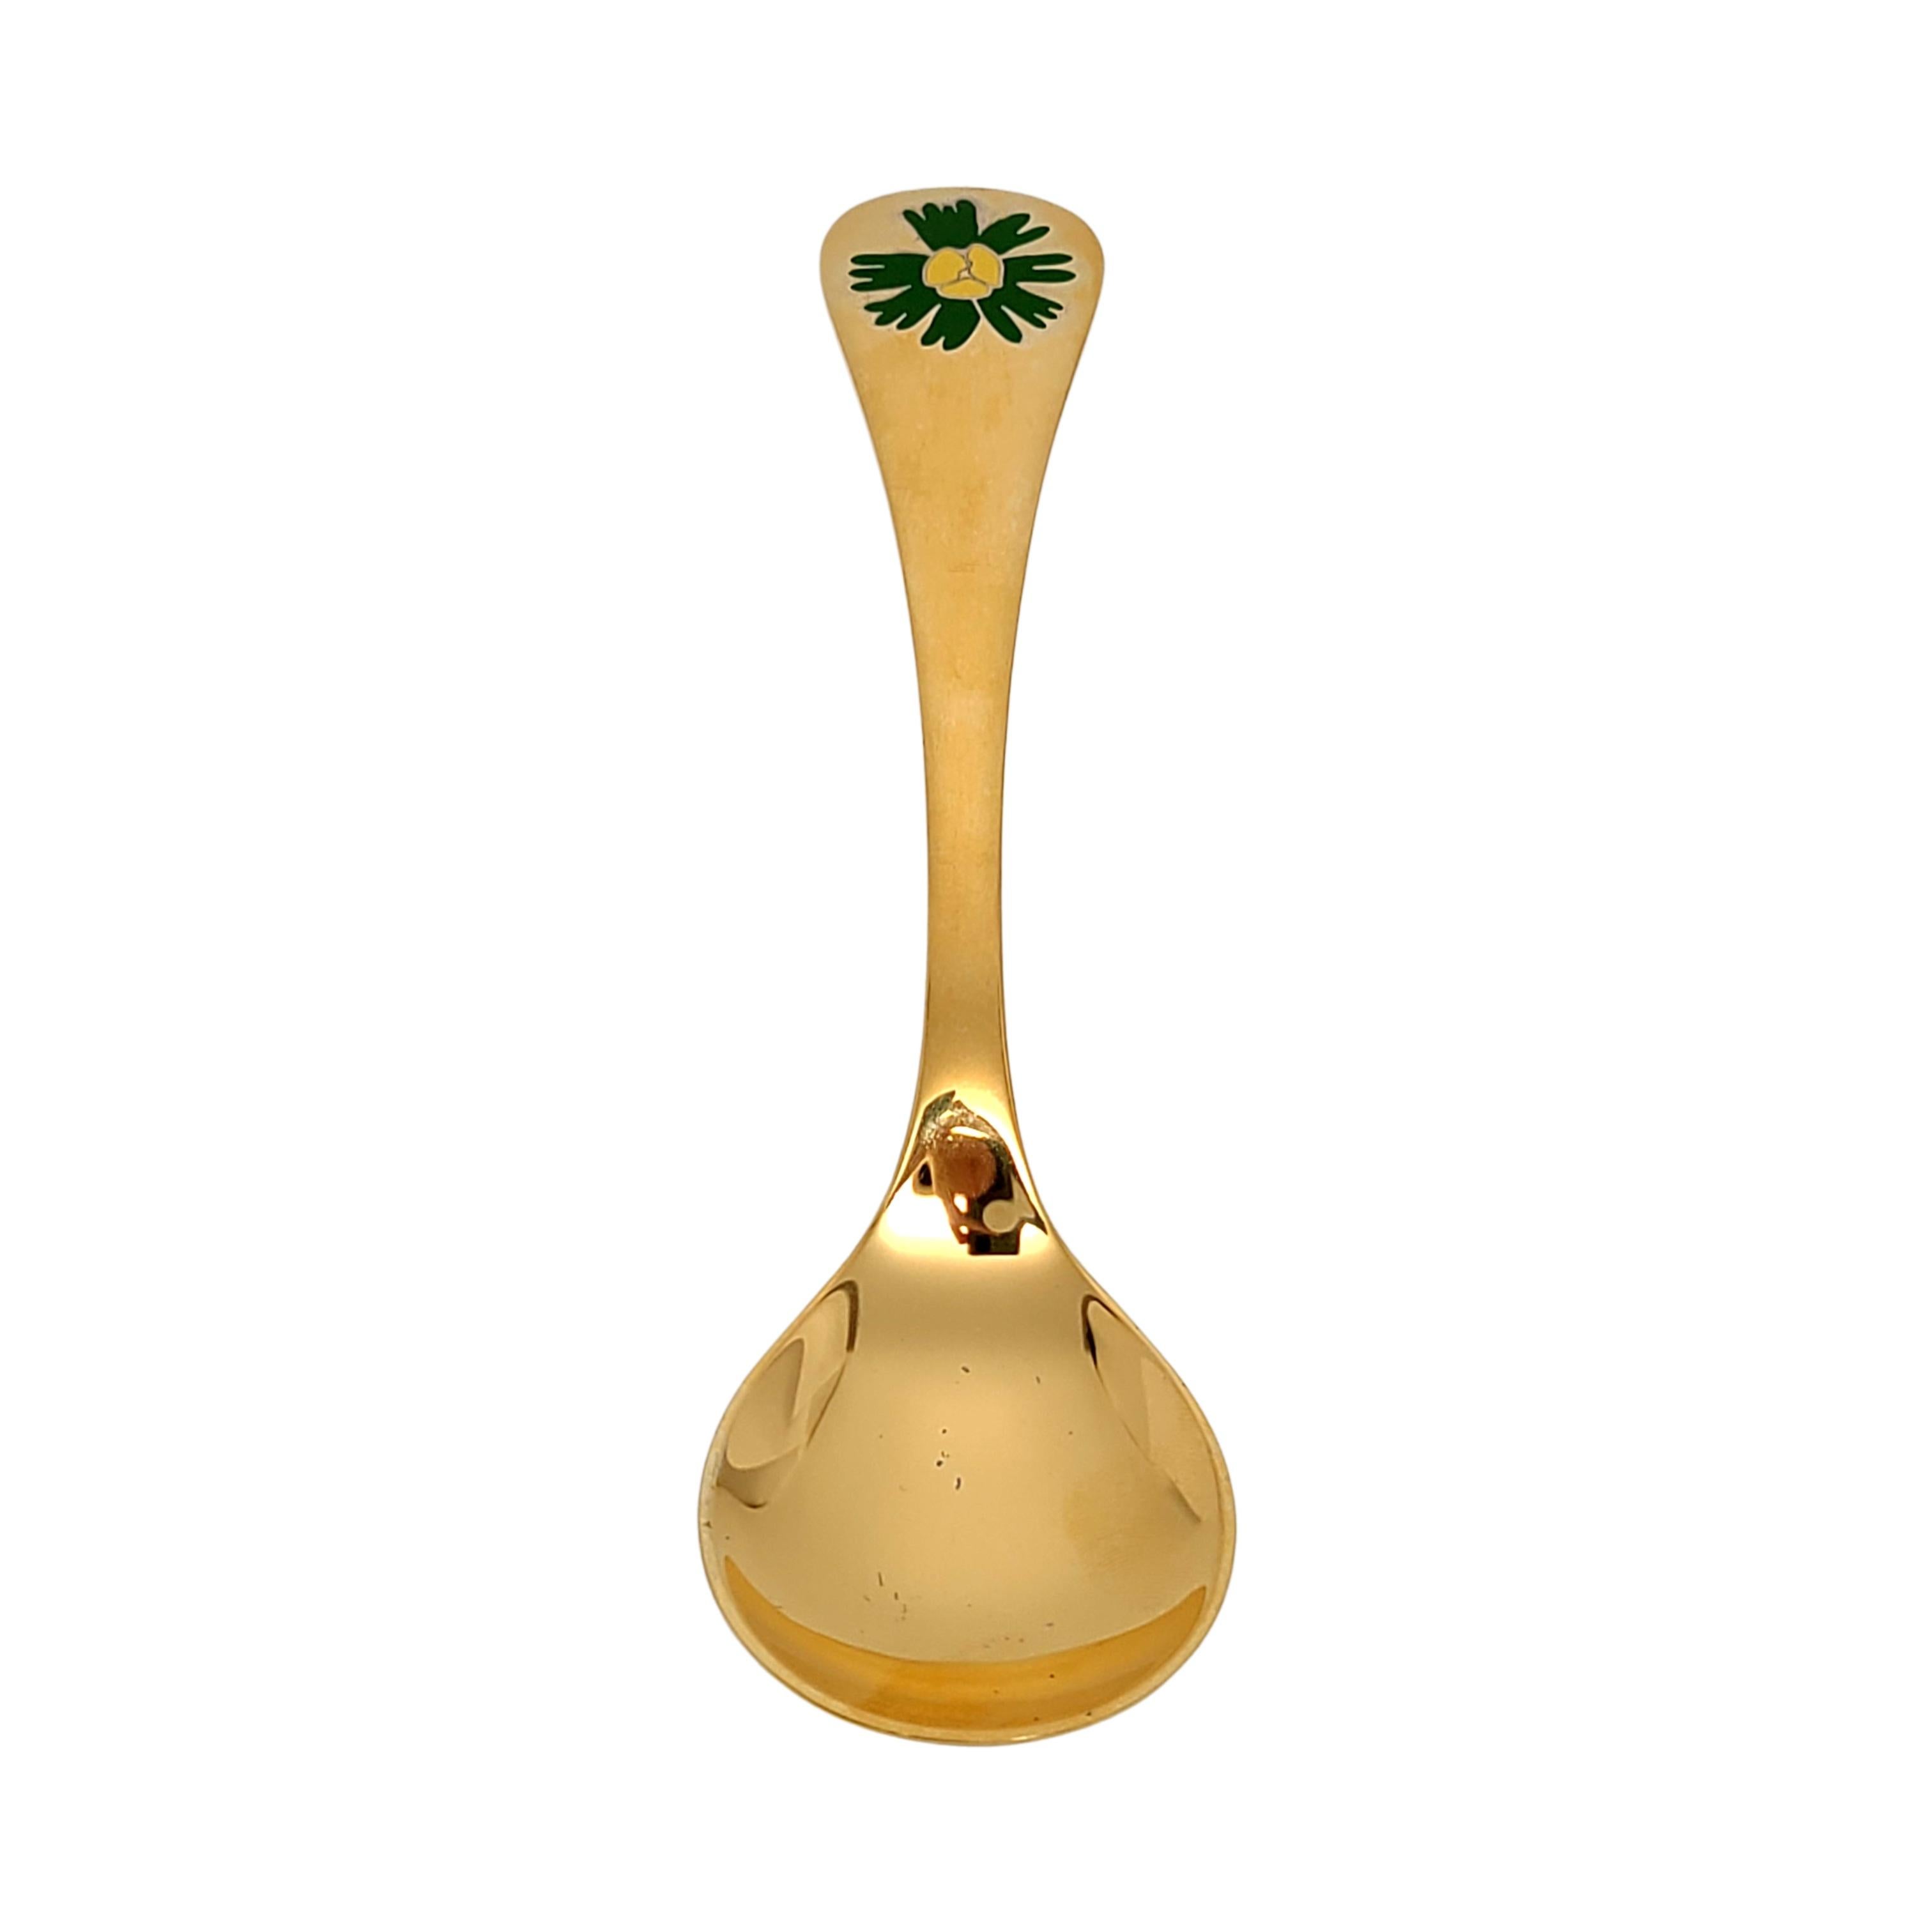 Georg Jensen gold plated sterling silver Annual Spoon from 1982, including the original box and paperwork.

The 12th in a series of annual spoons, all with Danish floral designs. This one is from 1982 and features Winter Aconite. No Winter Aconite